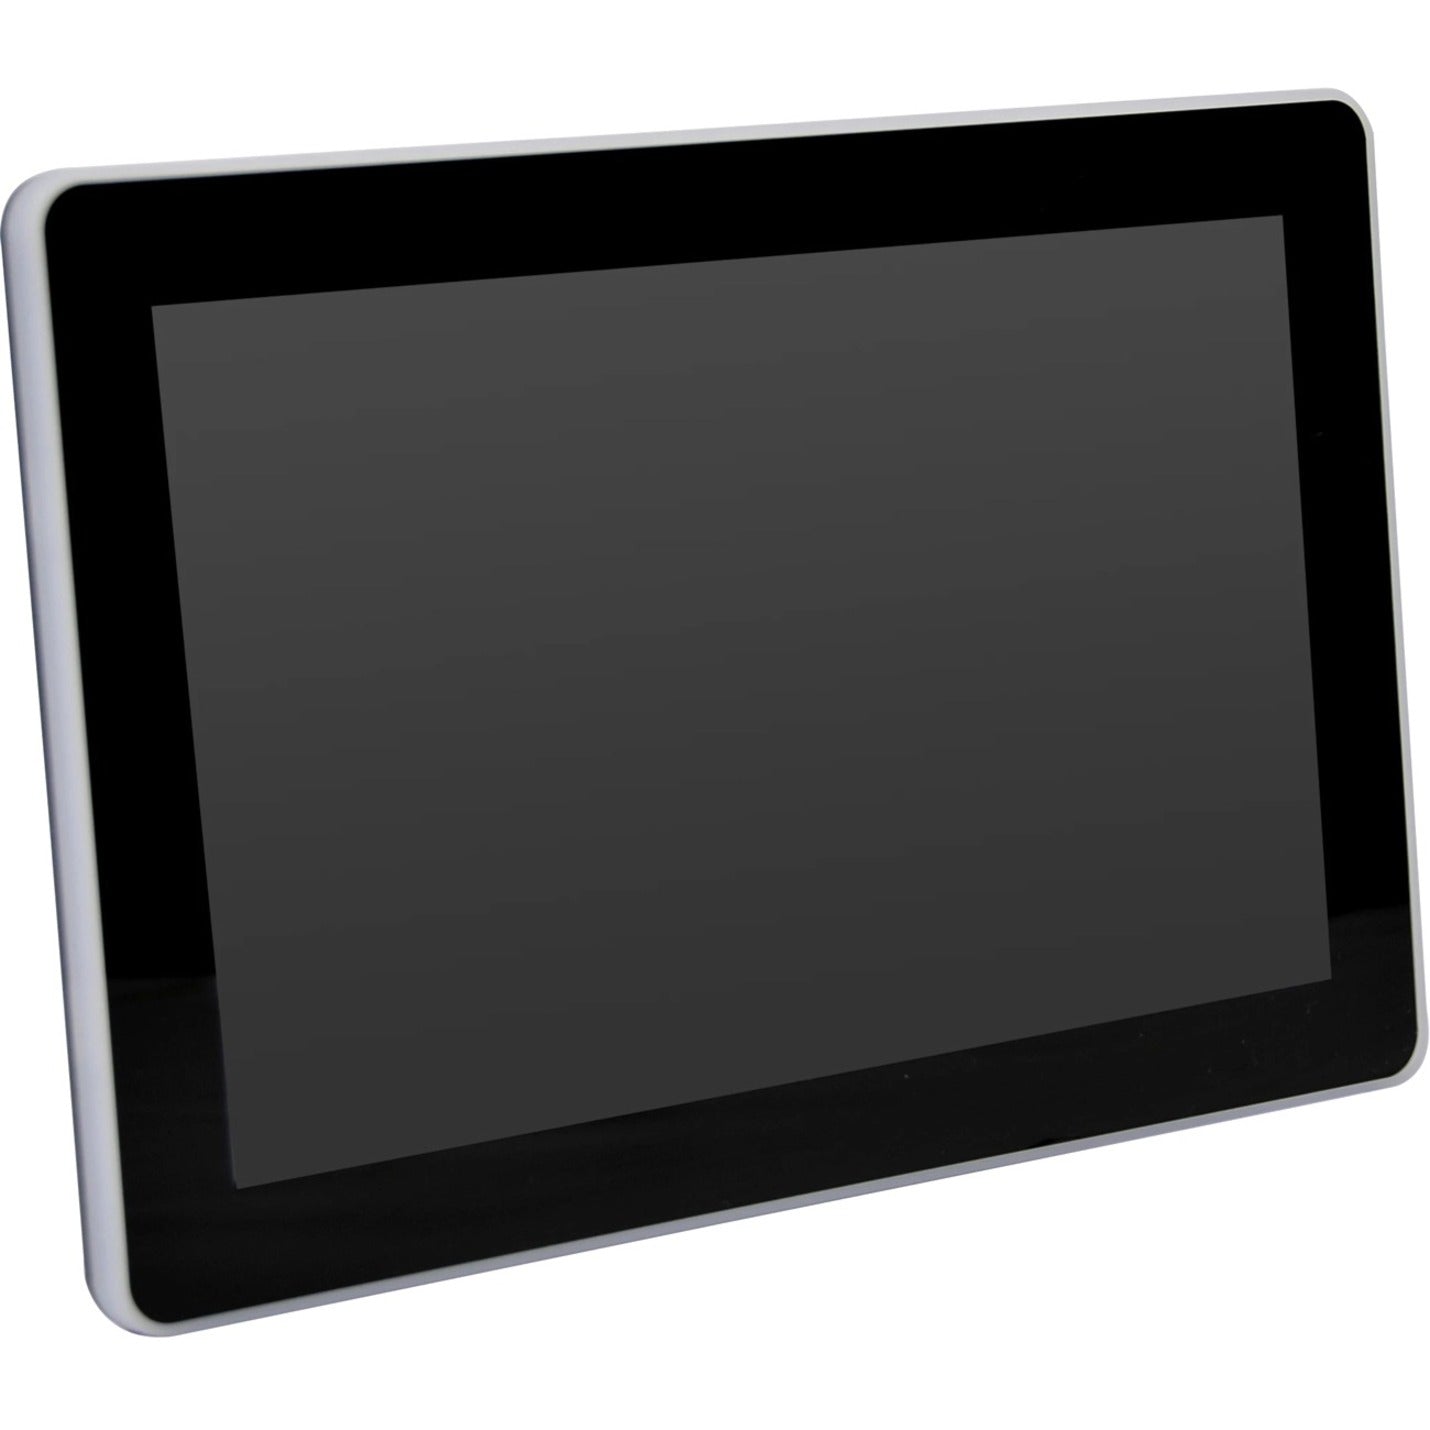 Mimo Monitors MBS-1080C-POE-L Vue Digital Signage Display, 10.1" Touchscreen, 1280 x 800, LED Backlight, 350 Nit